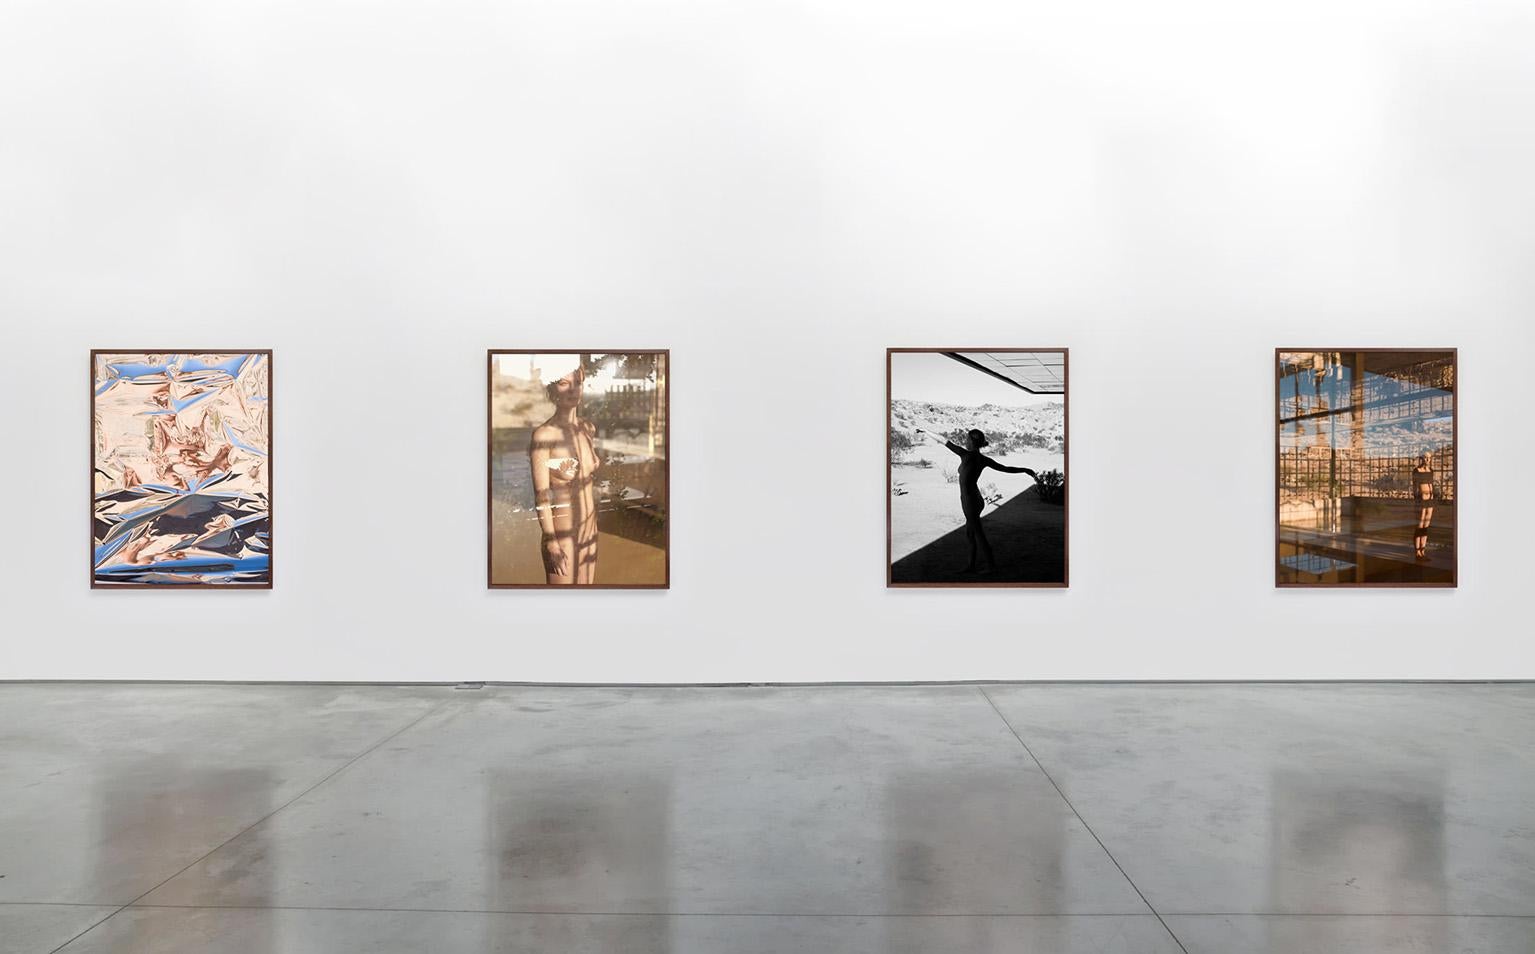 In the series 'She Disappeared into Complete Silence' (2014) Mona Kuhn takes a new direction into abstraction.
She turns to a highly austere and restrained reductionist geometry and distilled formal purity, connecting the interior to the exterior,